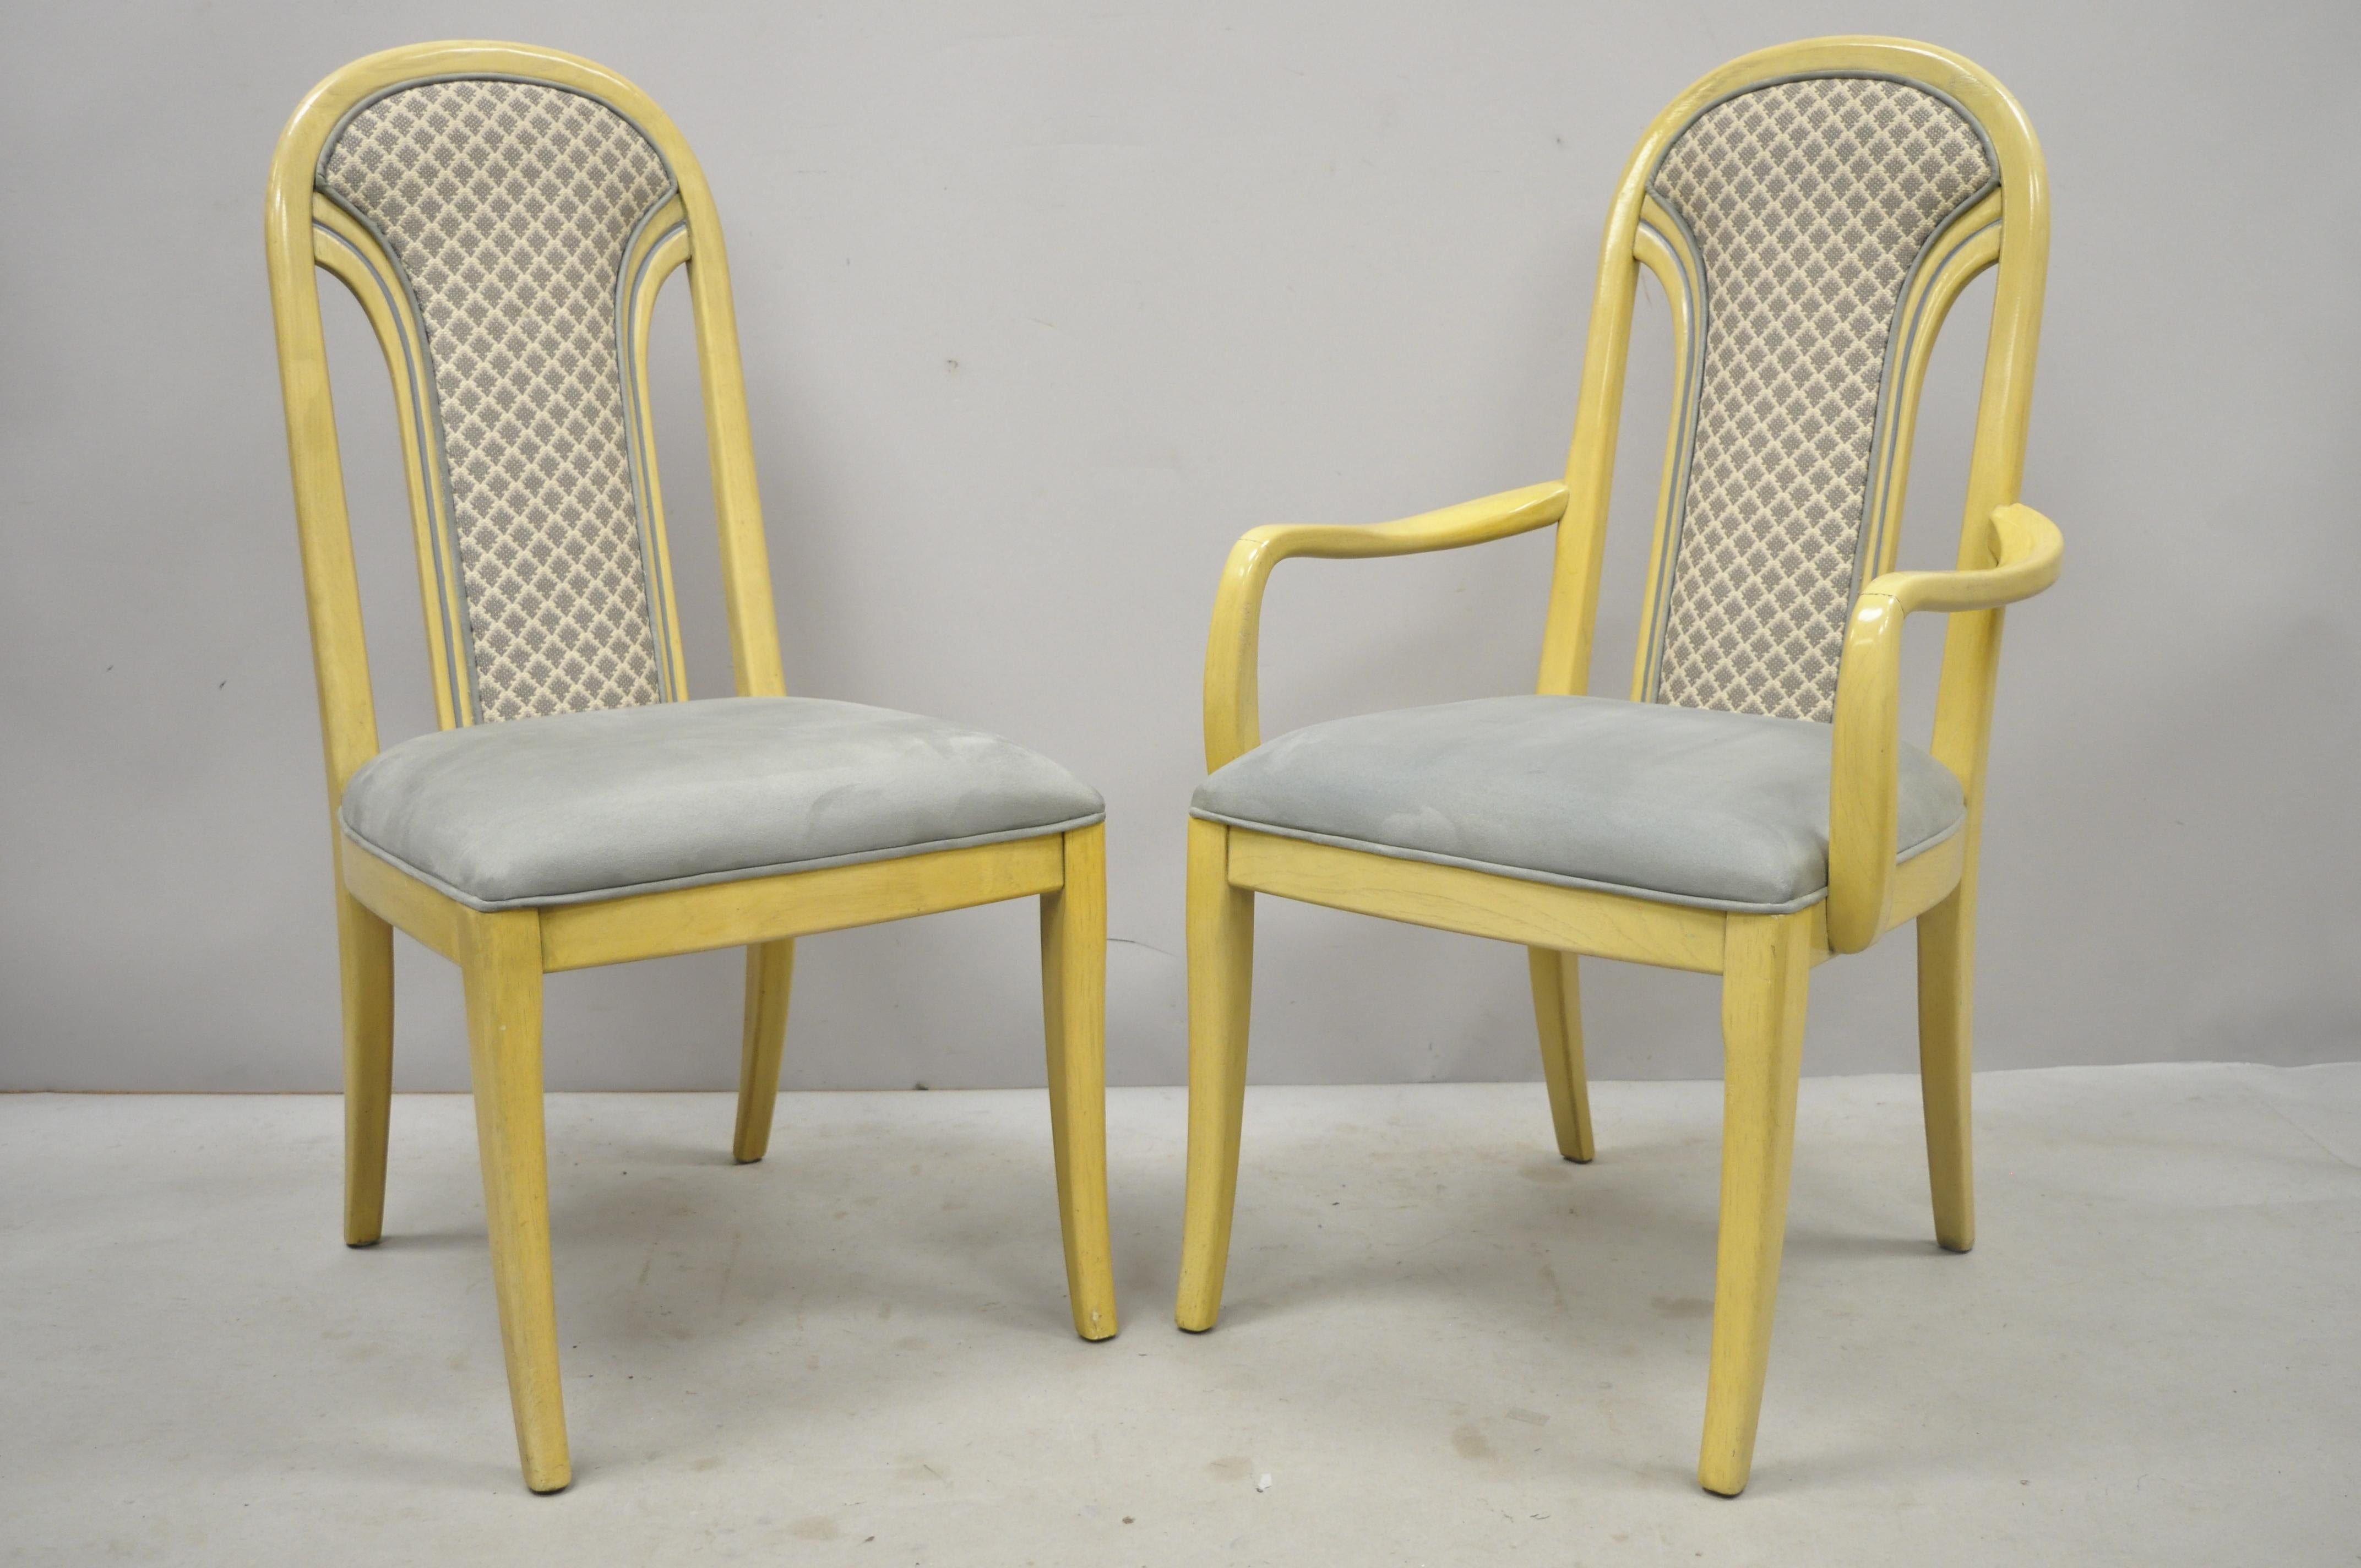 Set of 6 vintage Art Deco style cream upholstered back dining chairs attributed to Henredon. Listing includes (2) armchairs, (4) side chairs, cream painted finish, blue painted accents, solid wood frame, upholstered seat, tapered legs, very nice